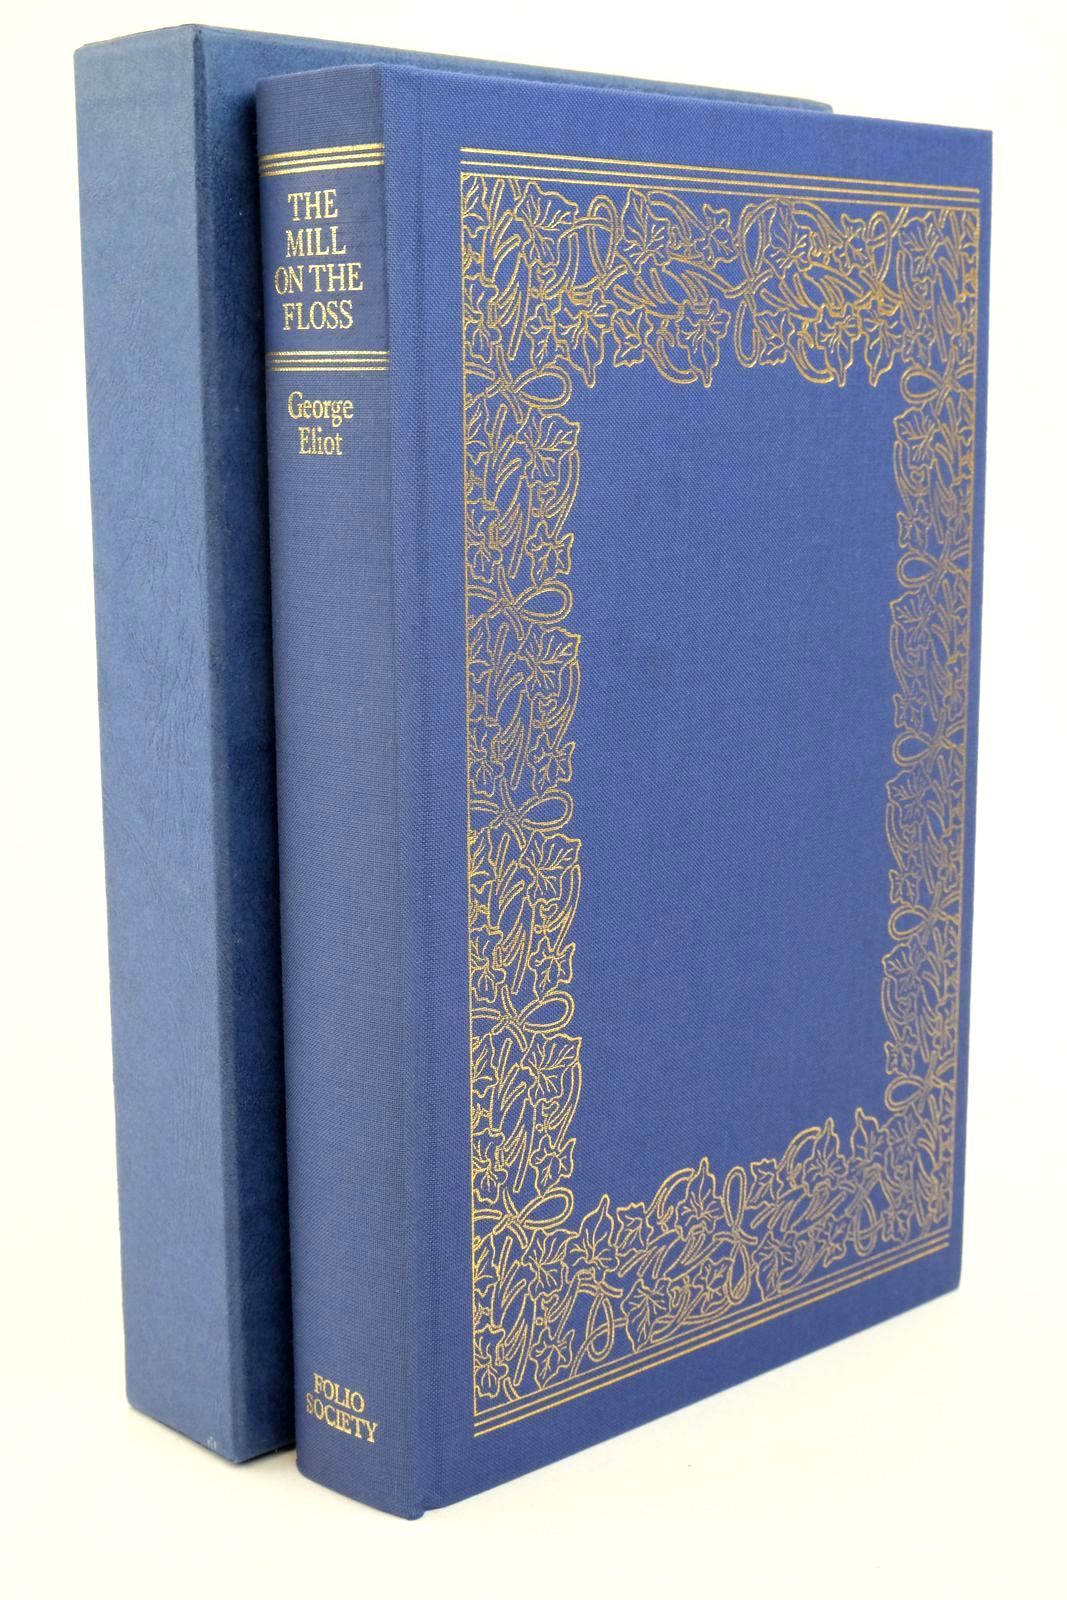 Photo of THE MILL ON THE FLOSS written by Eliot, George
Mooney, Bel illustrated by MacNeill, Alyson published by Folio Society (STOCK CODE: 1322889)  for sale by Stella & Rose's Books